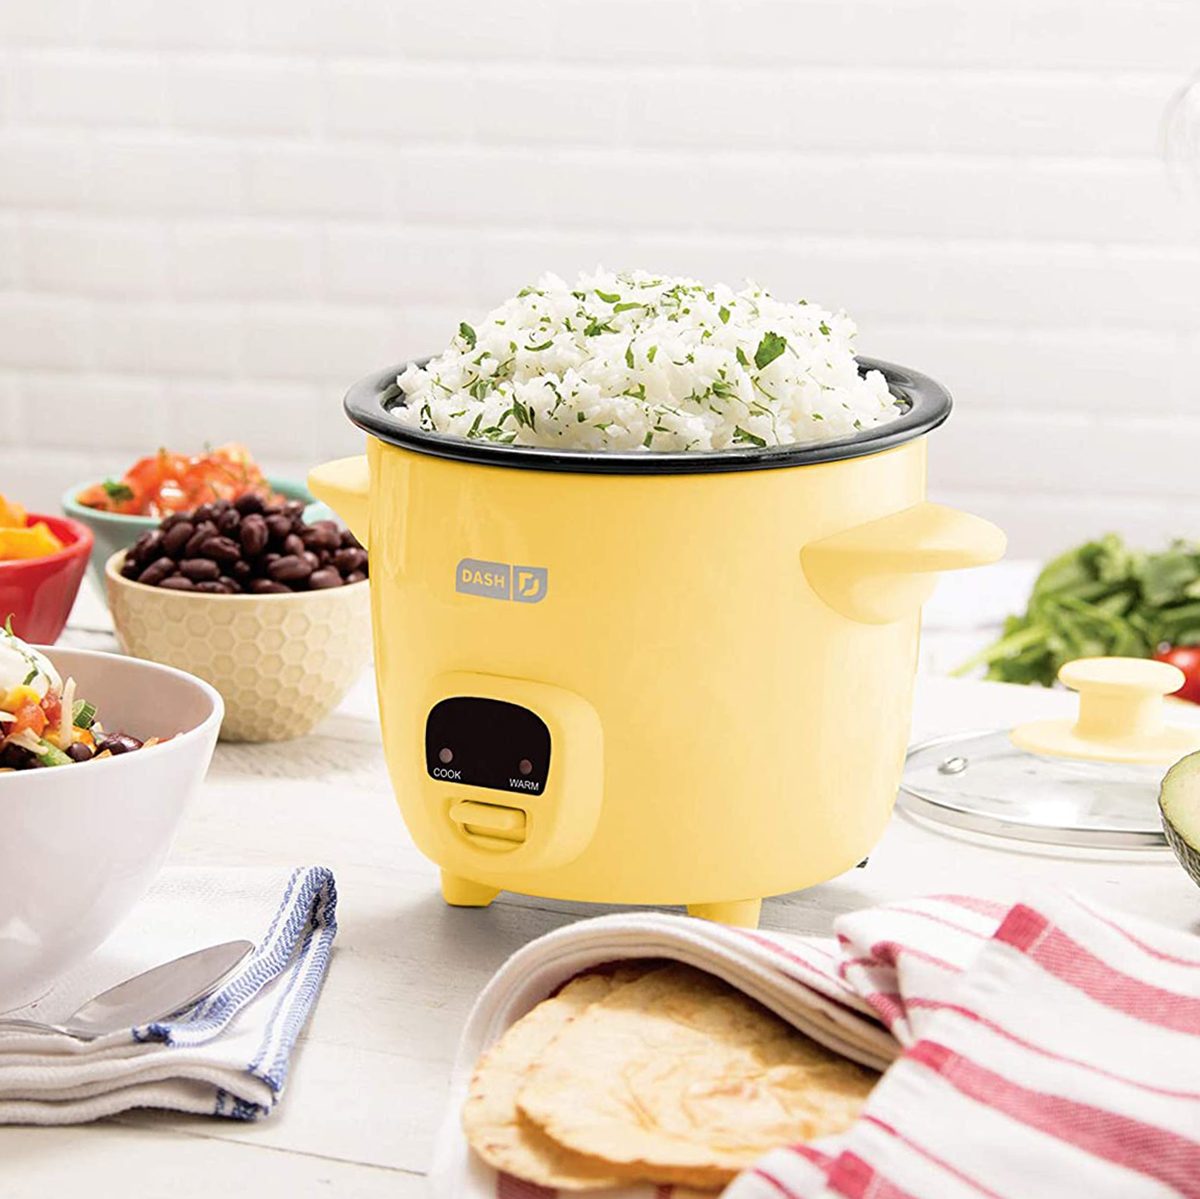 Dash DRCM200RMCM04 Mini Rice Cooker Steamer with Removable Nonstick Pot, Keep Warm Function & Recipe Guide, Yellow